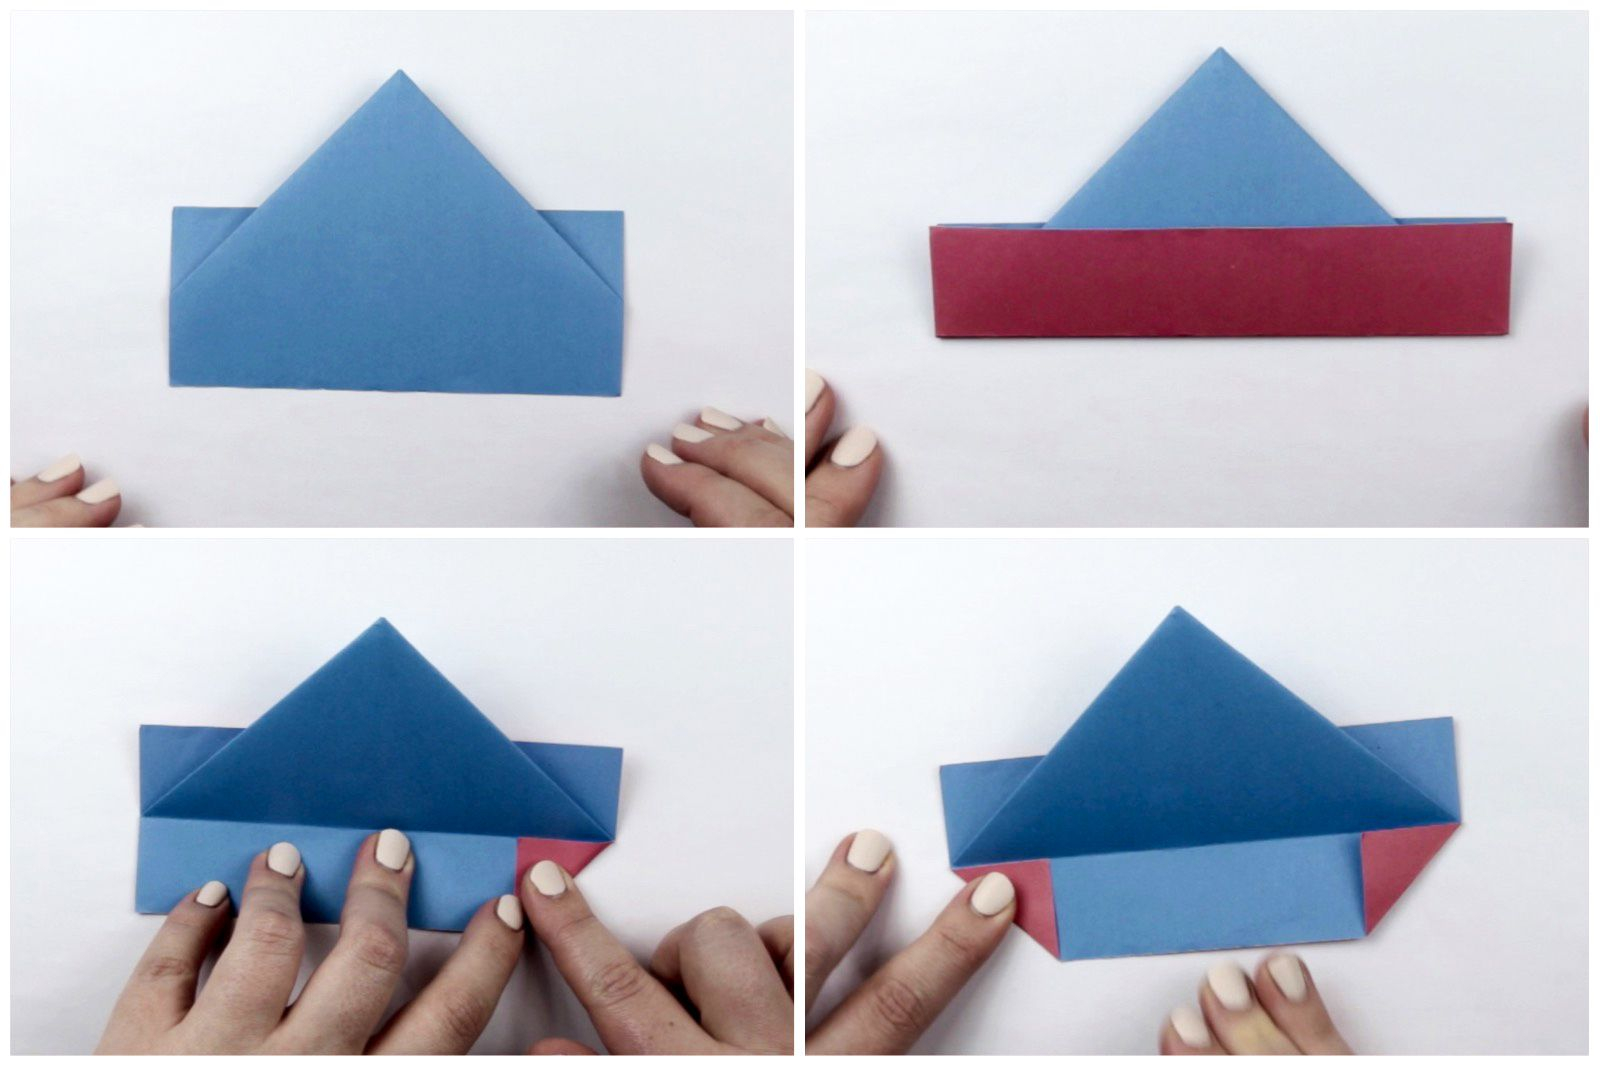 How To Make Origami Paper Boat How To Make An Easy Origami Boat